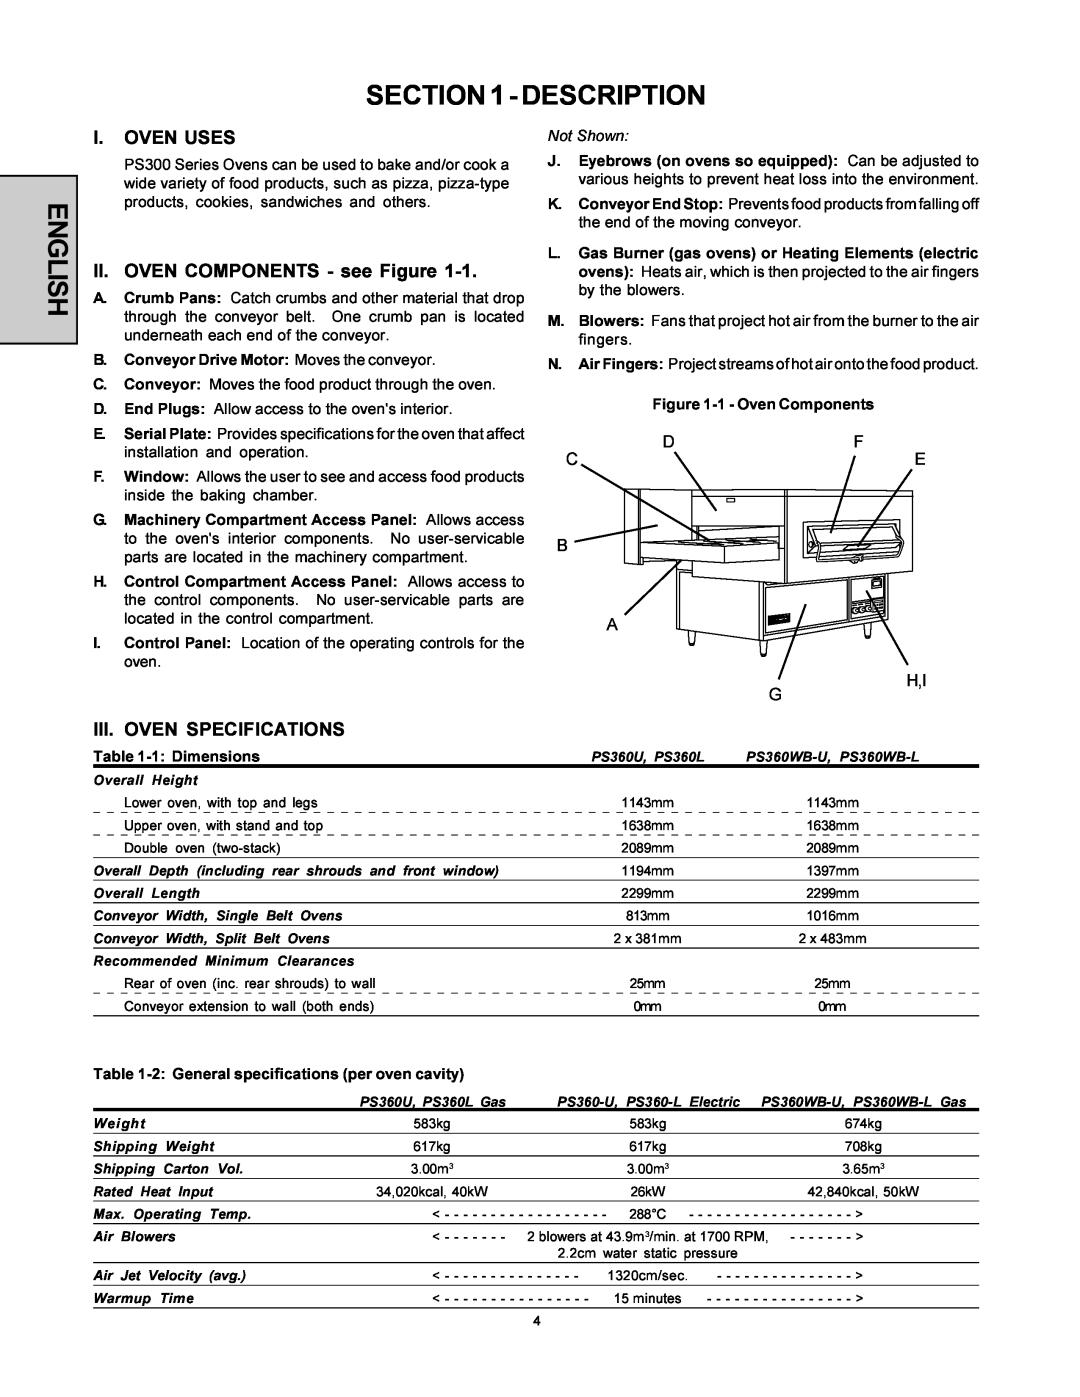 Middleby Marshall PS360-U Description, English, I.Oven Uses, II. OVEN COMPONENTS - see Figure, Iii. Oven Specifications 